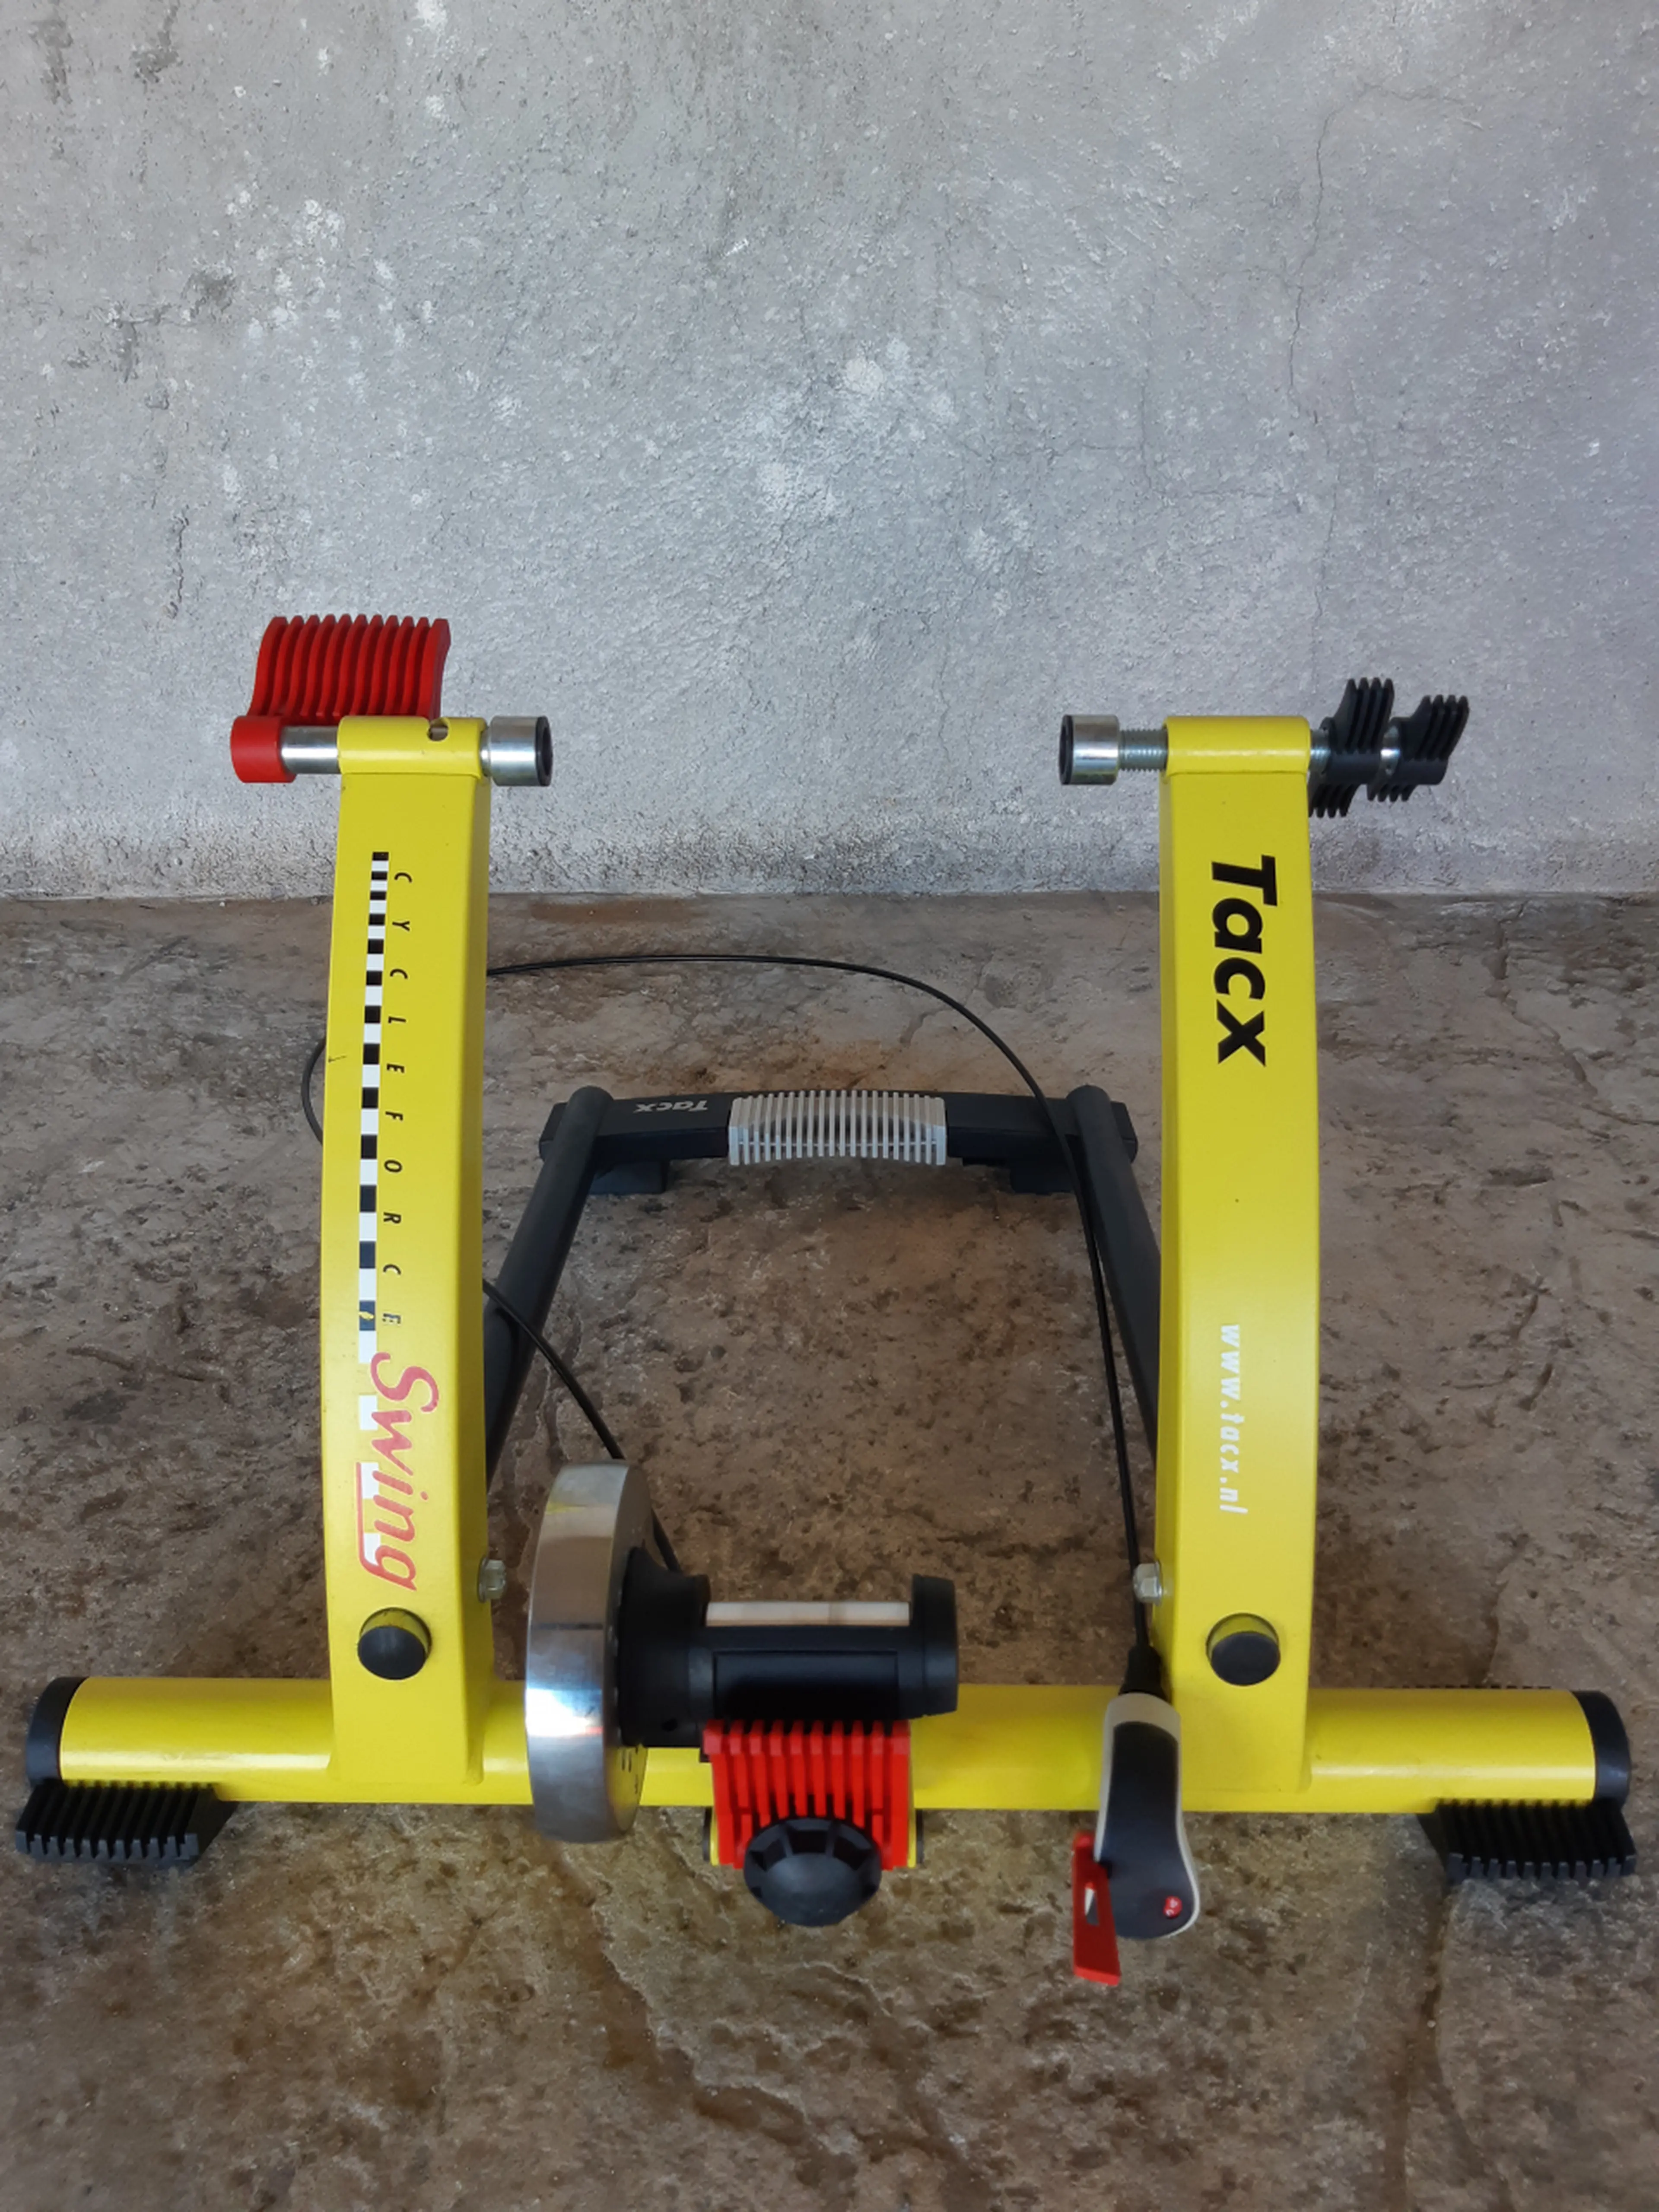 2. Trainer Tacx